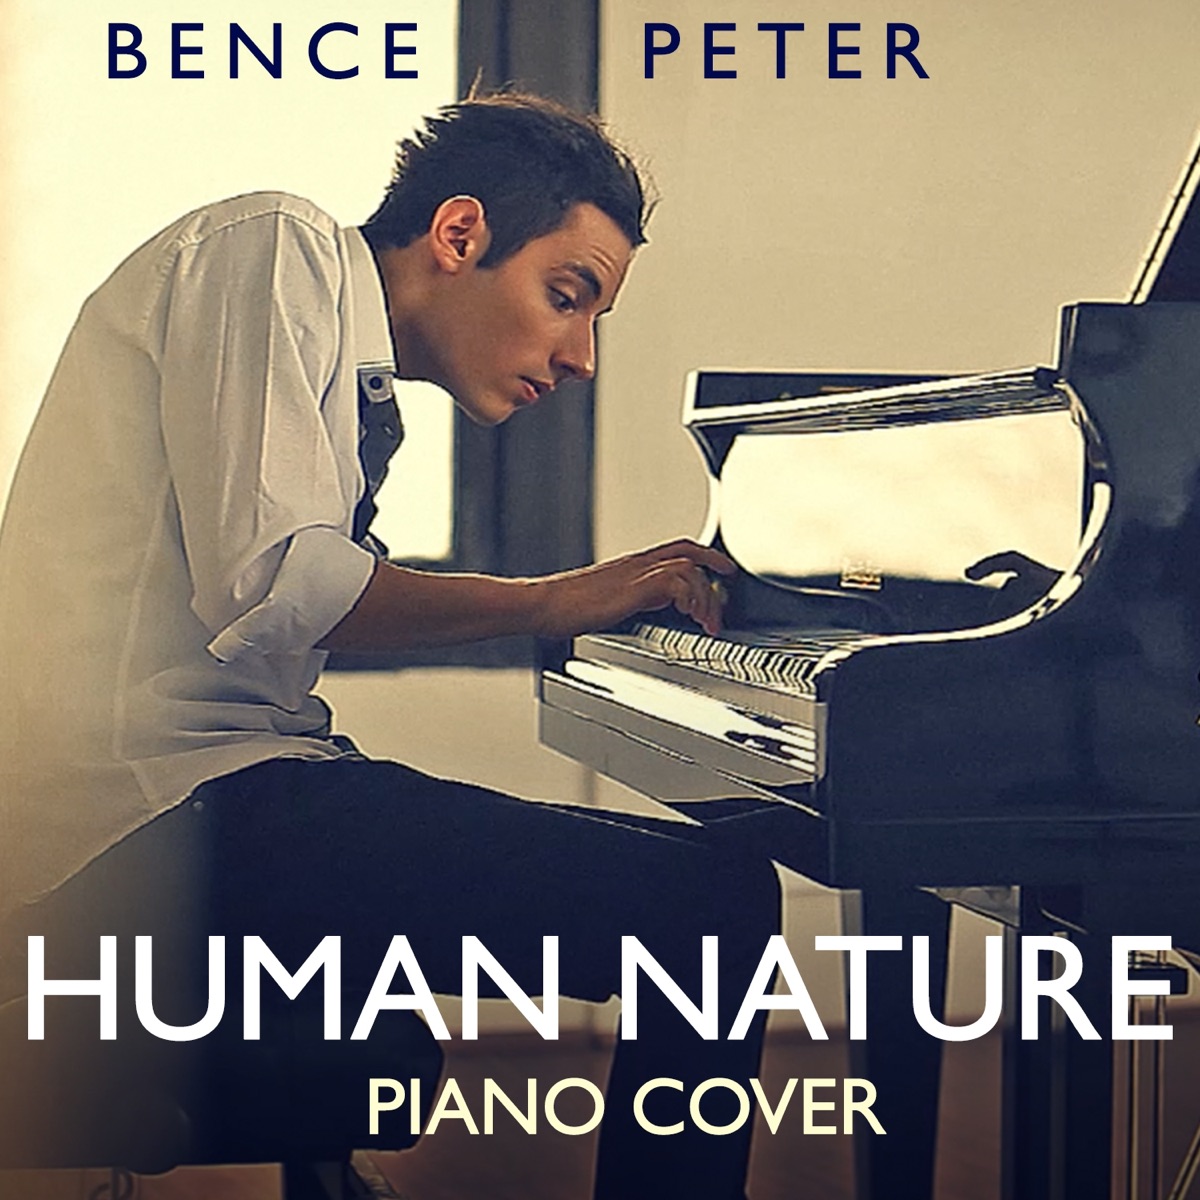 ‎Human Nature (Piano Cover) - Single by Bence Peter on Apple Music